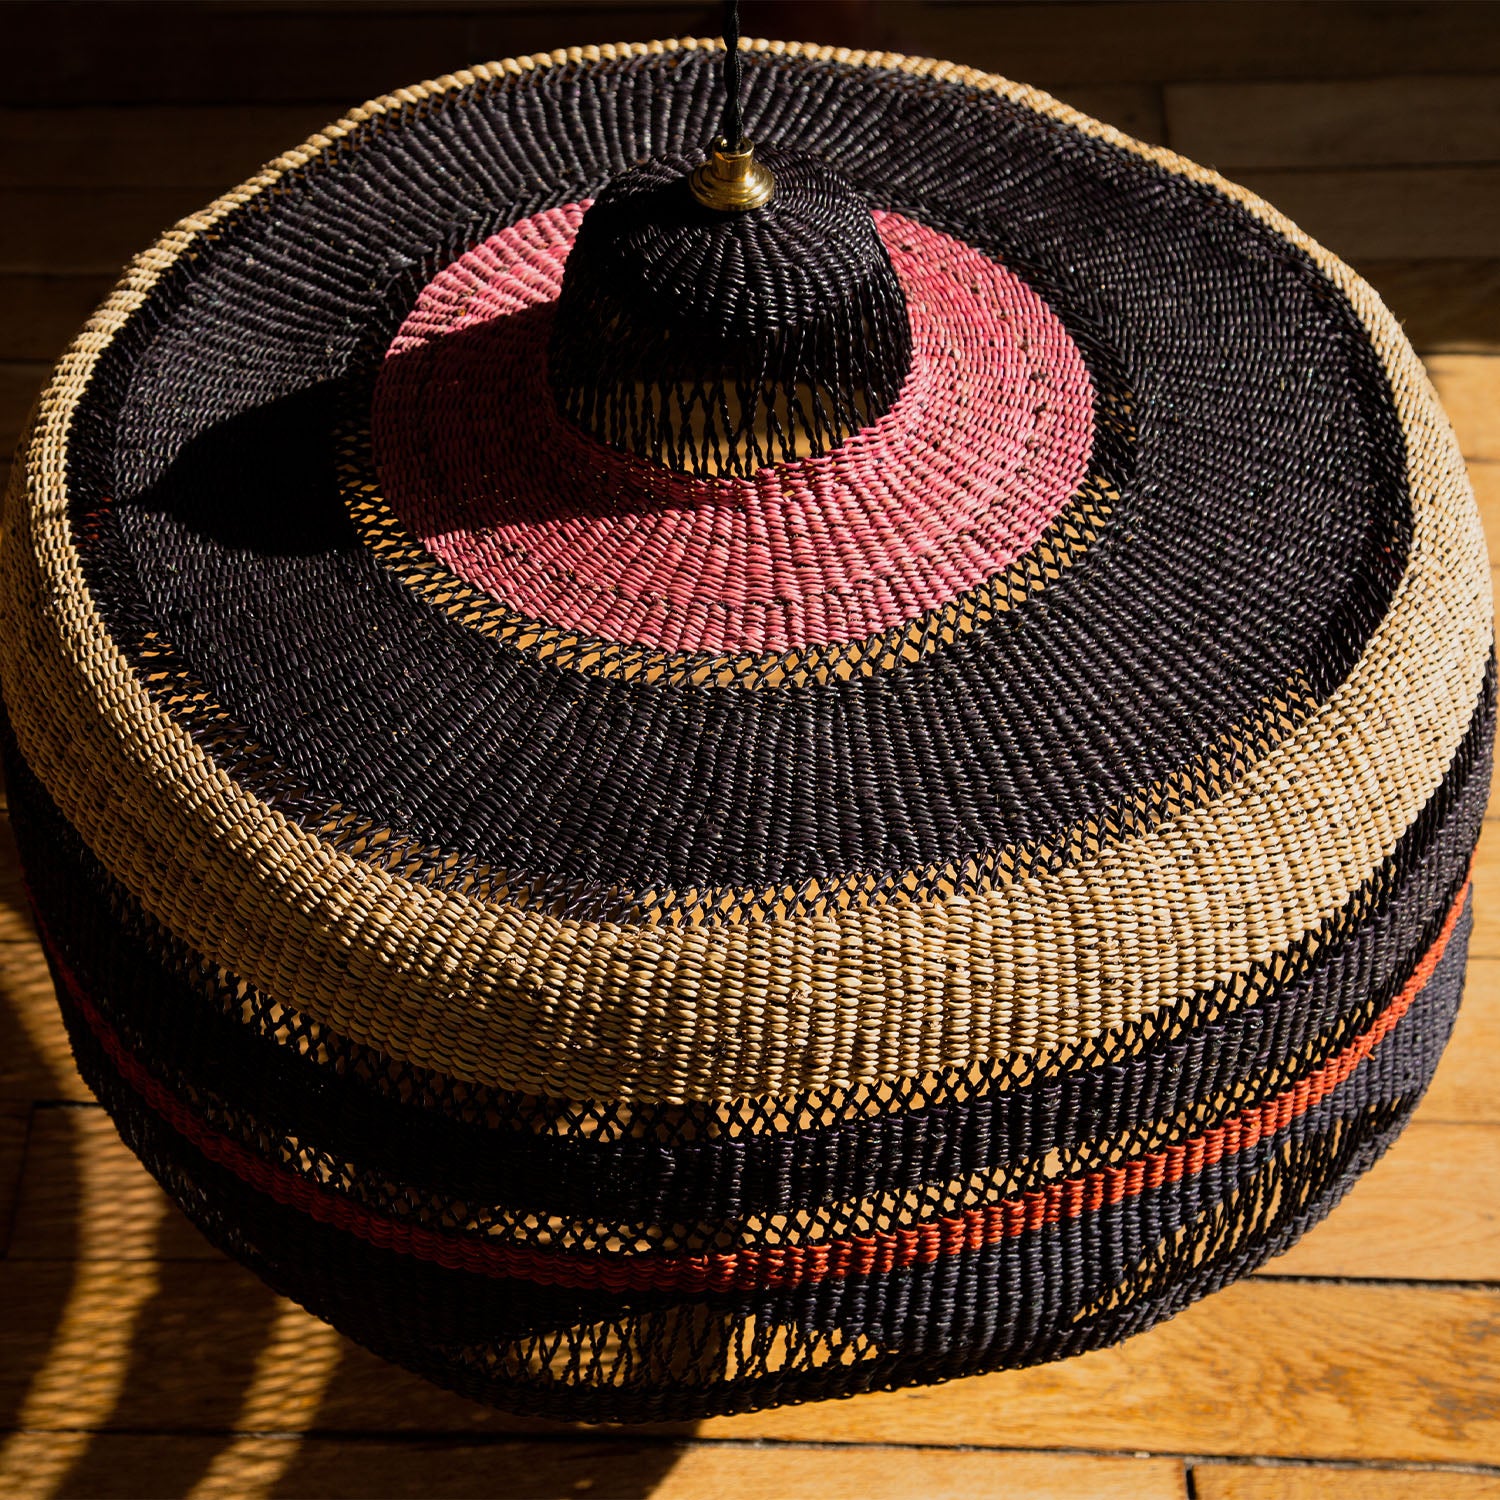 Exquisite handwoven African basket with intricate pattern and vibrant colors.